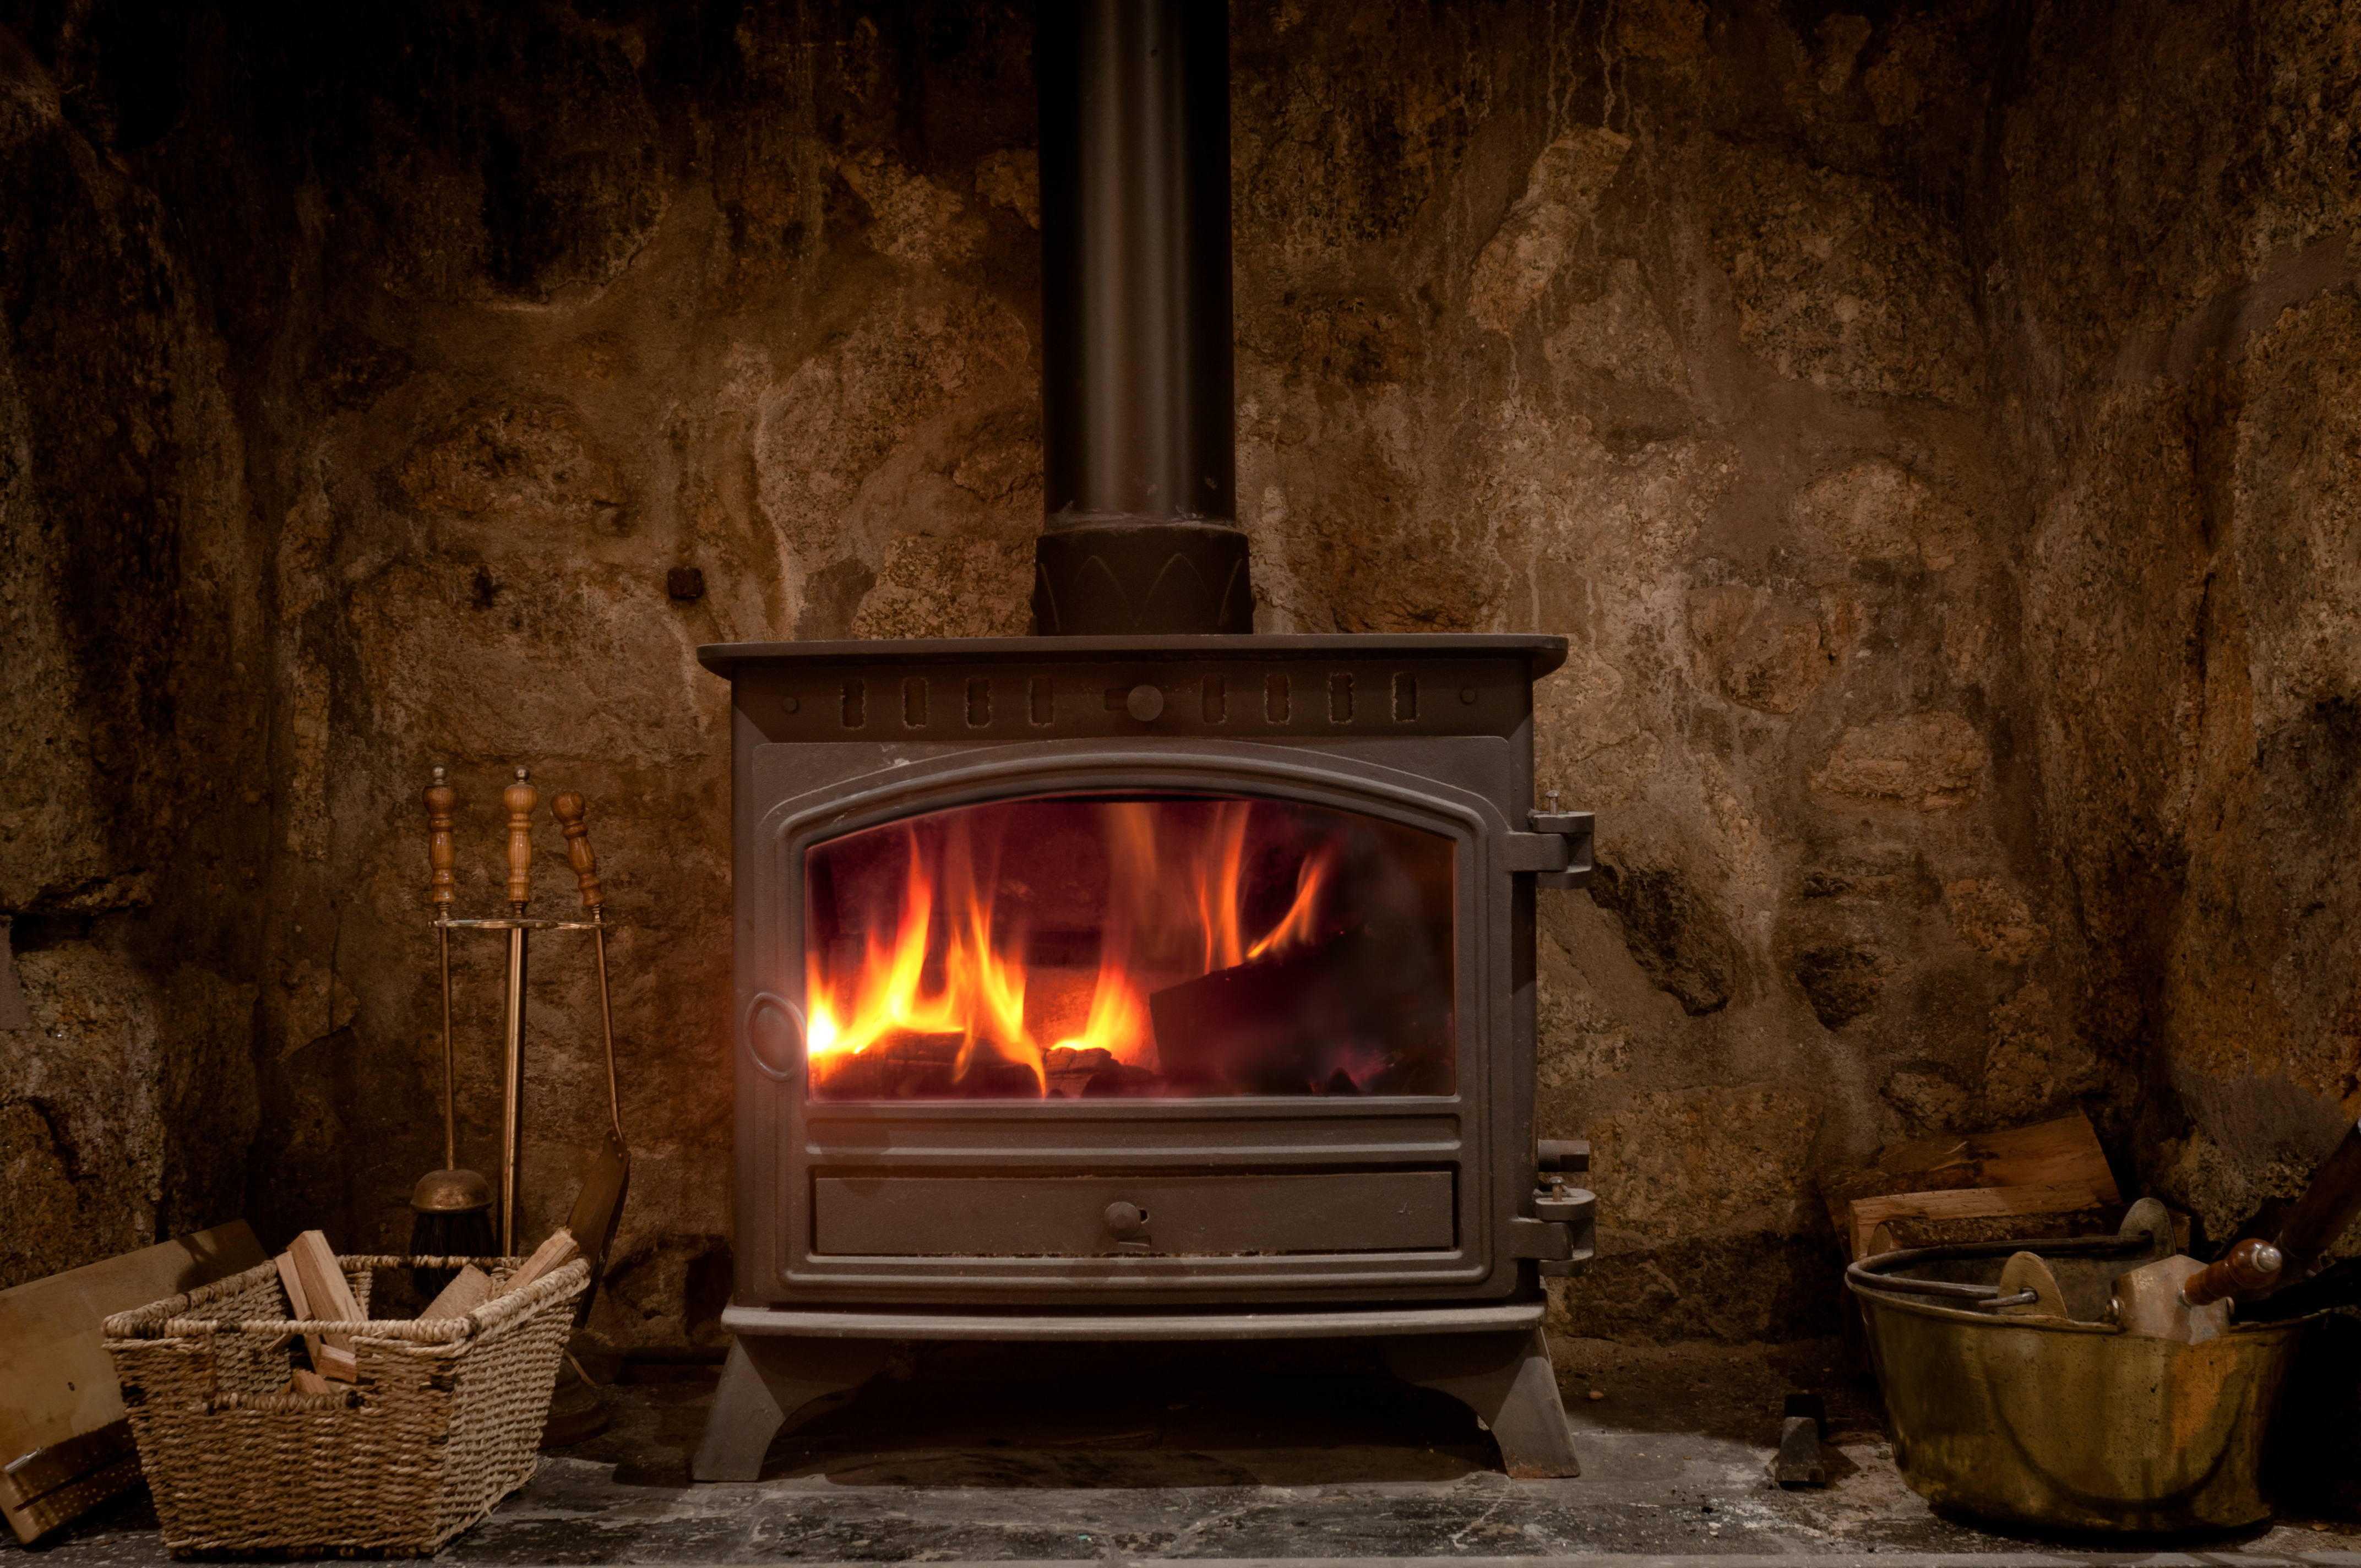 Fireplace Fresh Air Intake Vent Beautiful How to Control the Air In A Wood Burning Stove